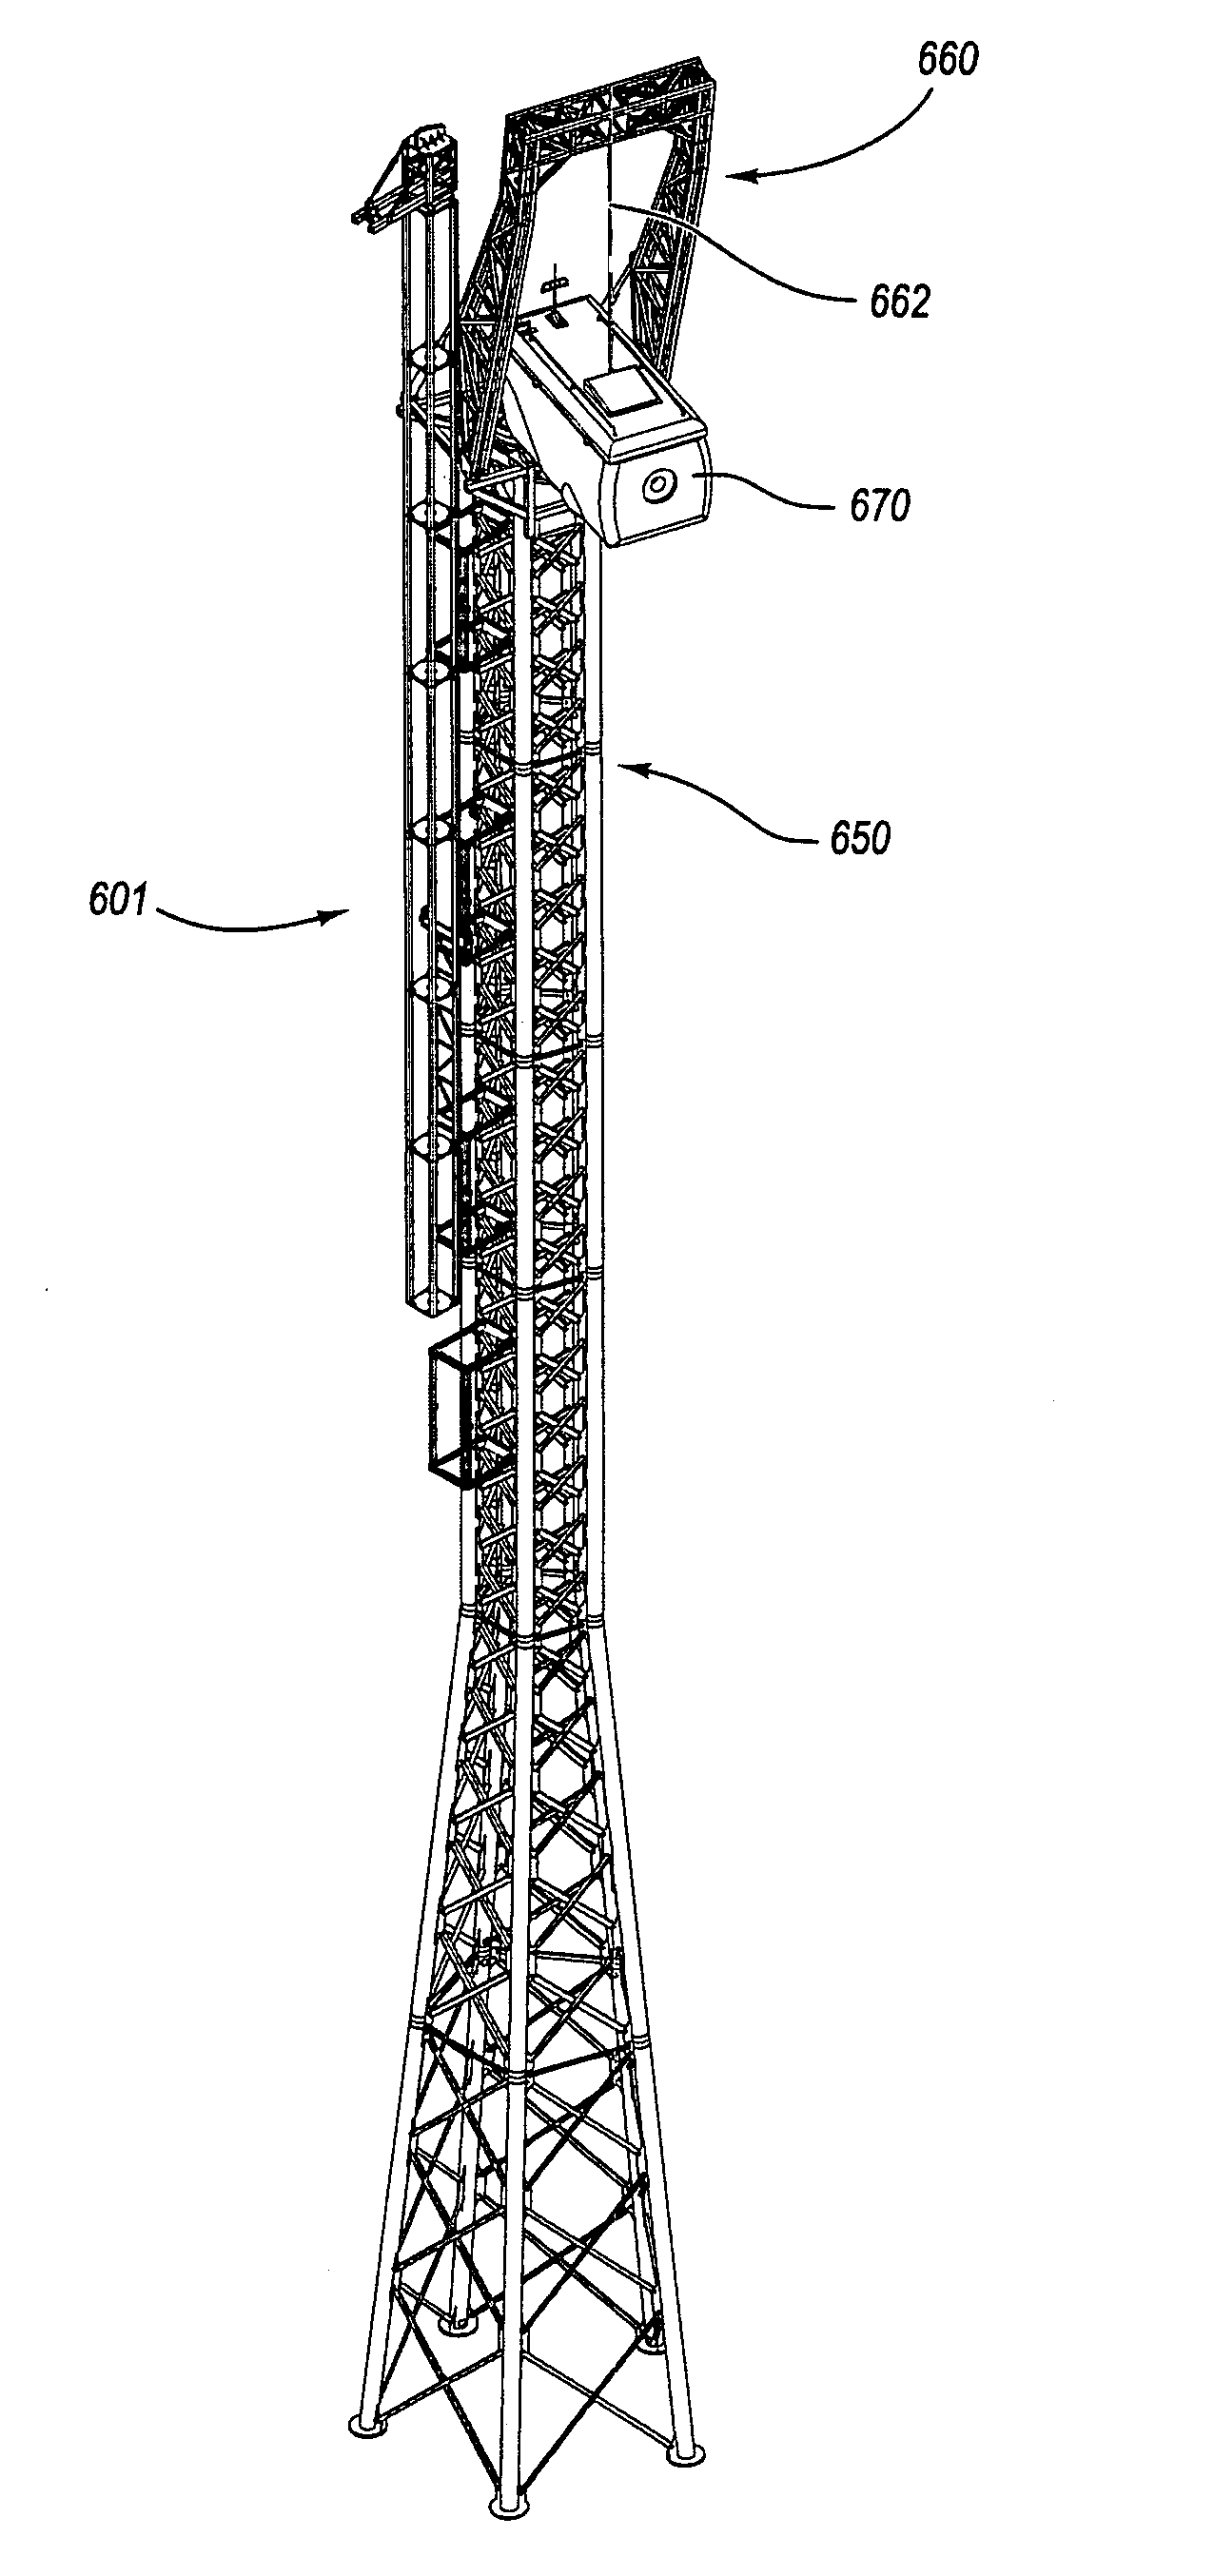 Lifting system and apparatus for constructing and enclosing wind turbine towers